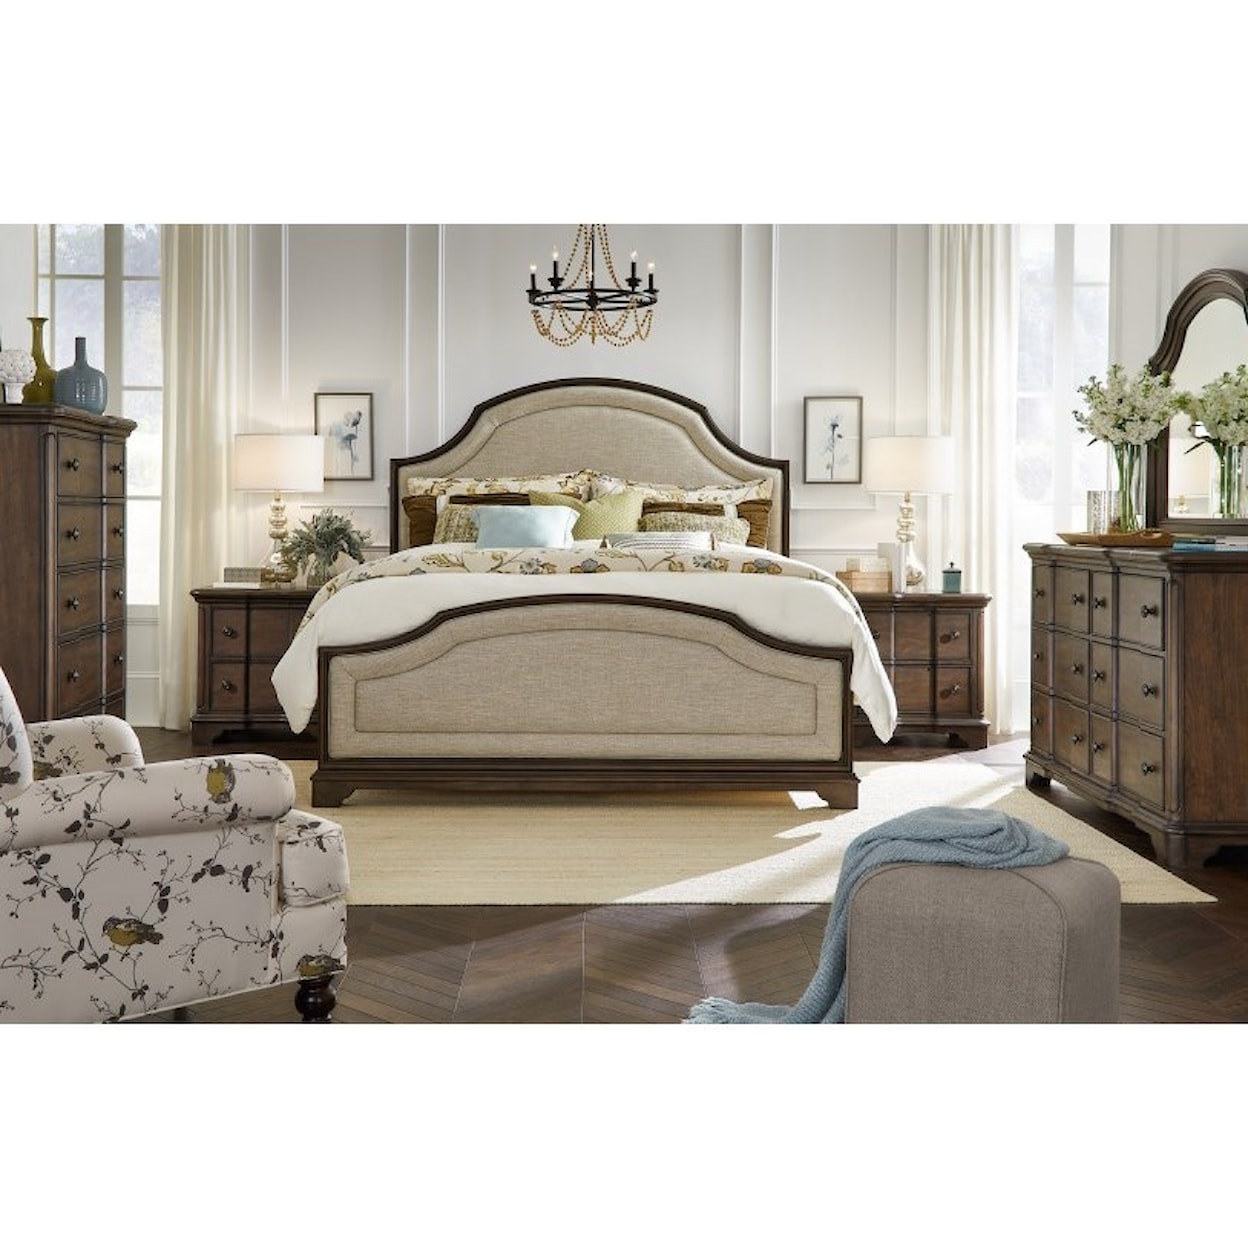 Legacy Classic Stafford Queen Bedroom Group